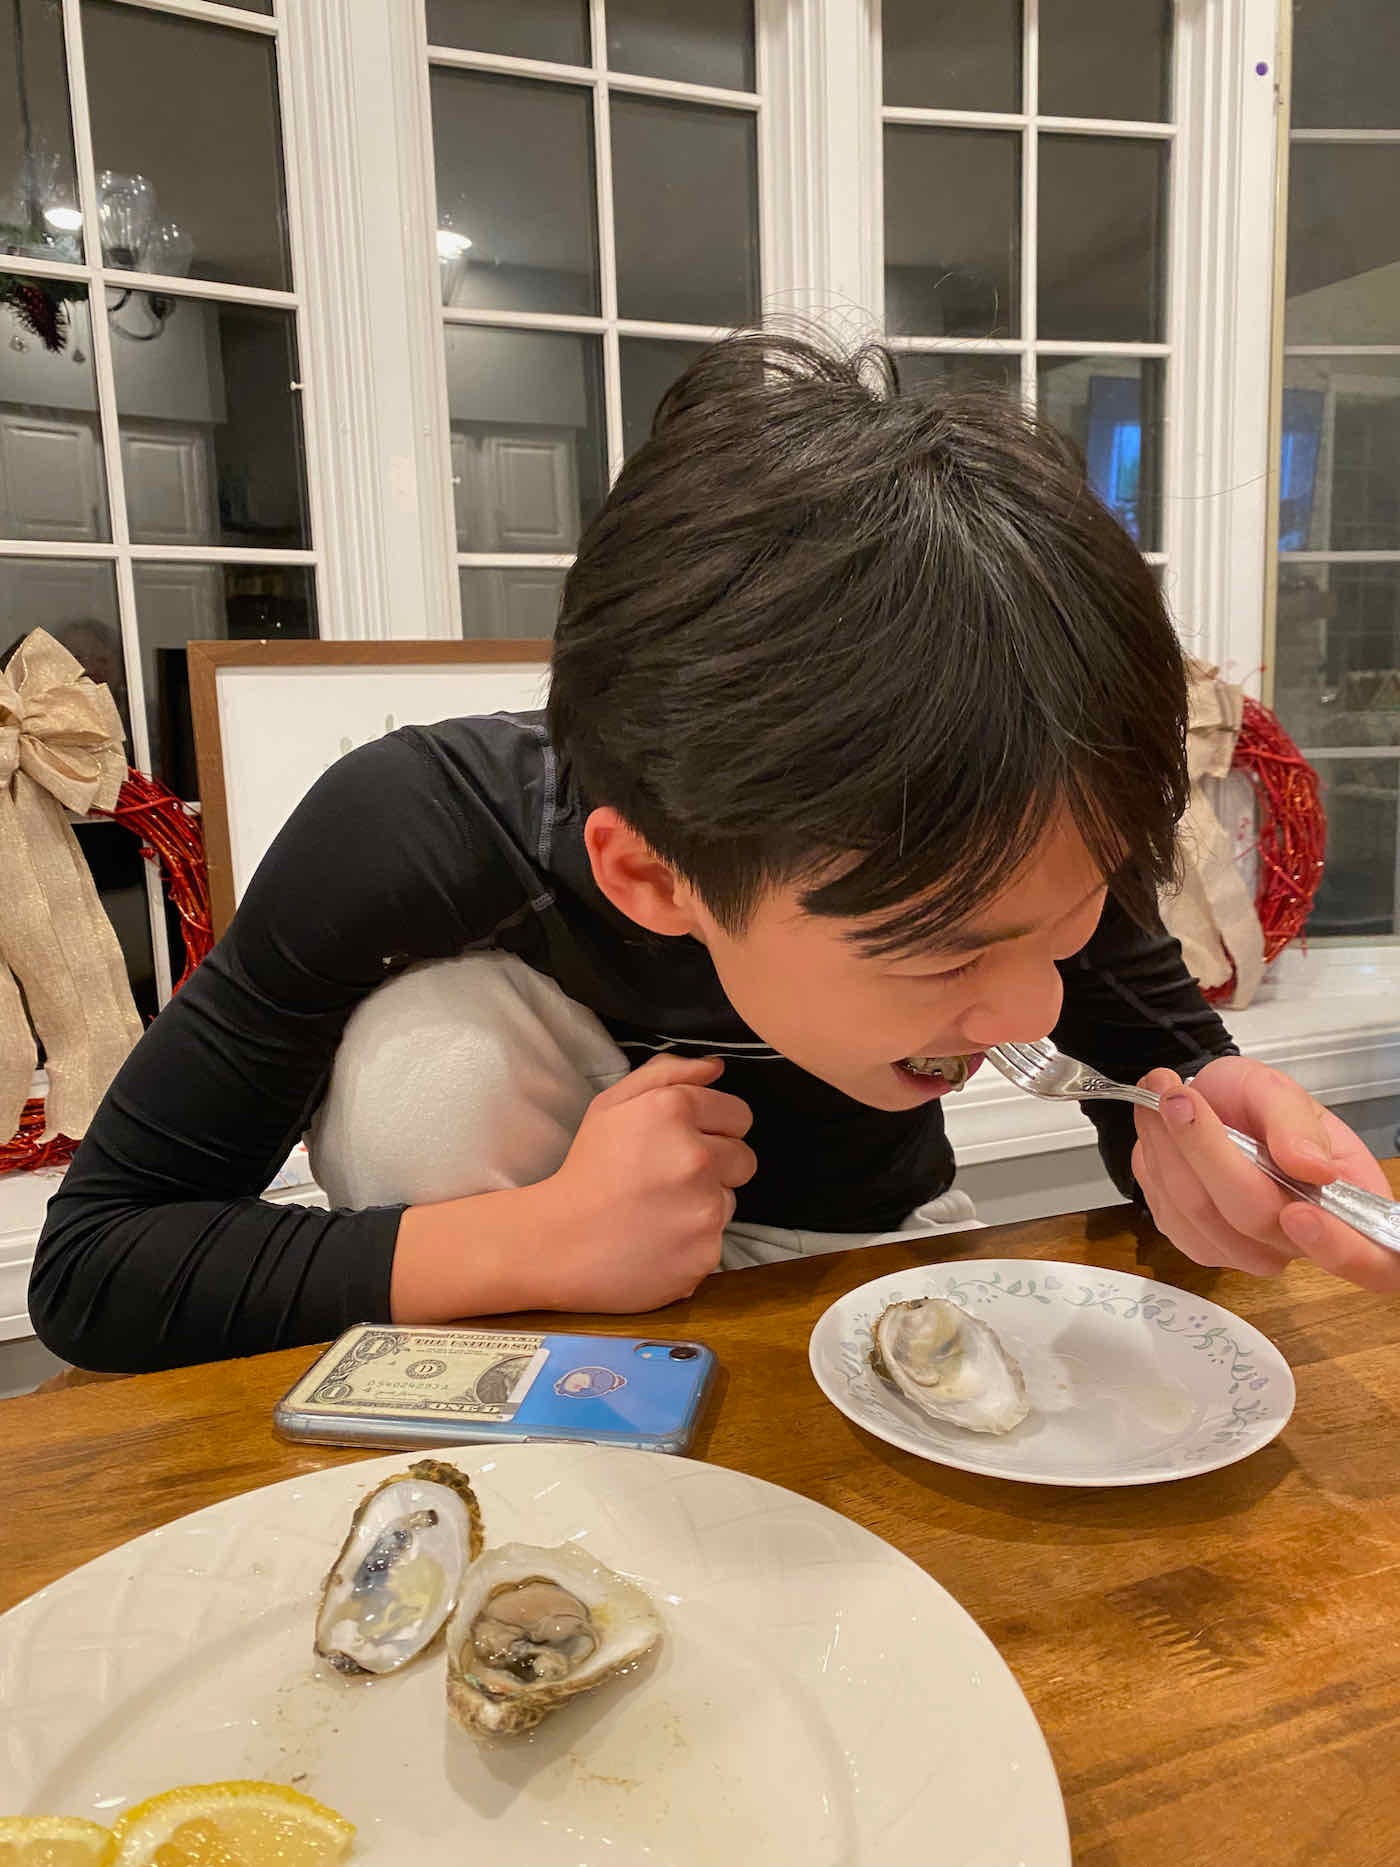 13-year-old Caleb tastes his first-ever raw oyster